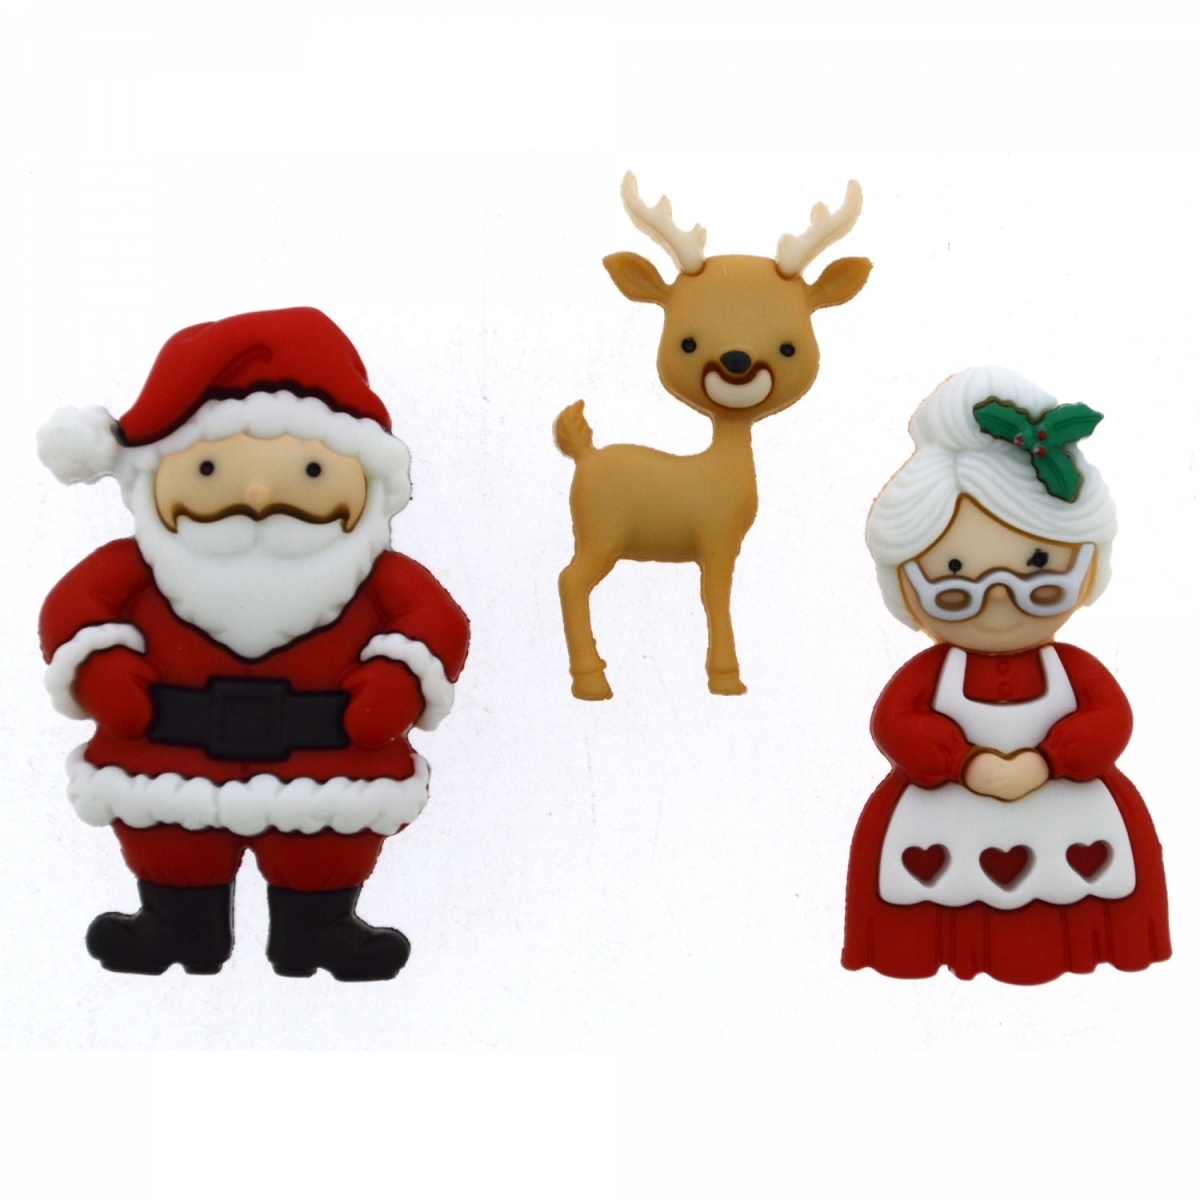 Mr and Mrs Claus Set of Decorative Buttons фото 1